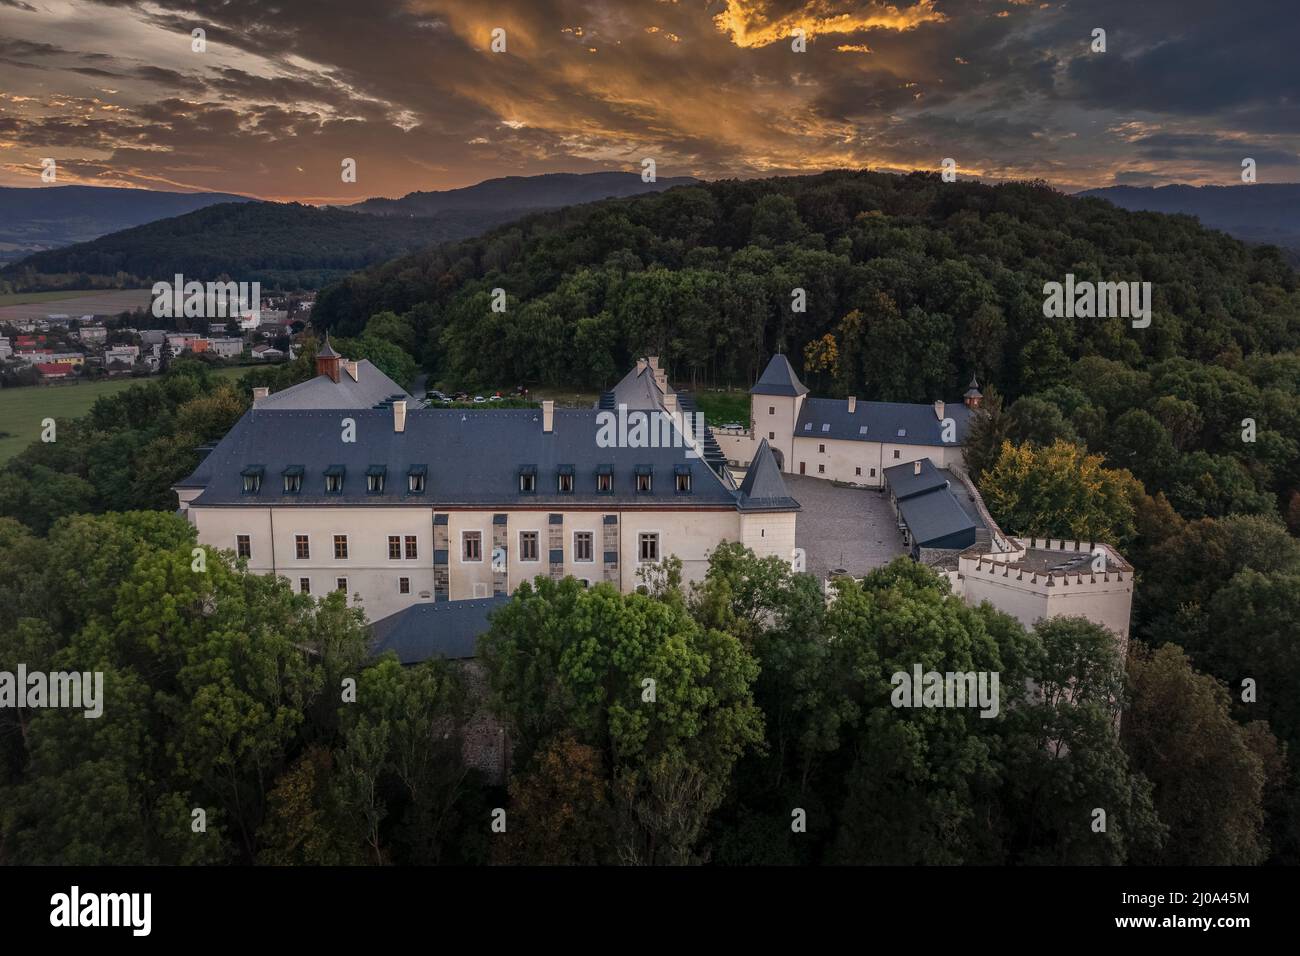 Aerial sunset view of restored medieval Viglas castle in Southern Slovakia serving as a luxury hotel with medieval themed rooms Stock Photo